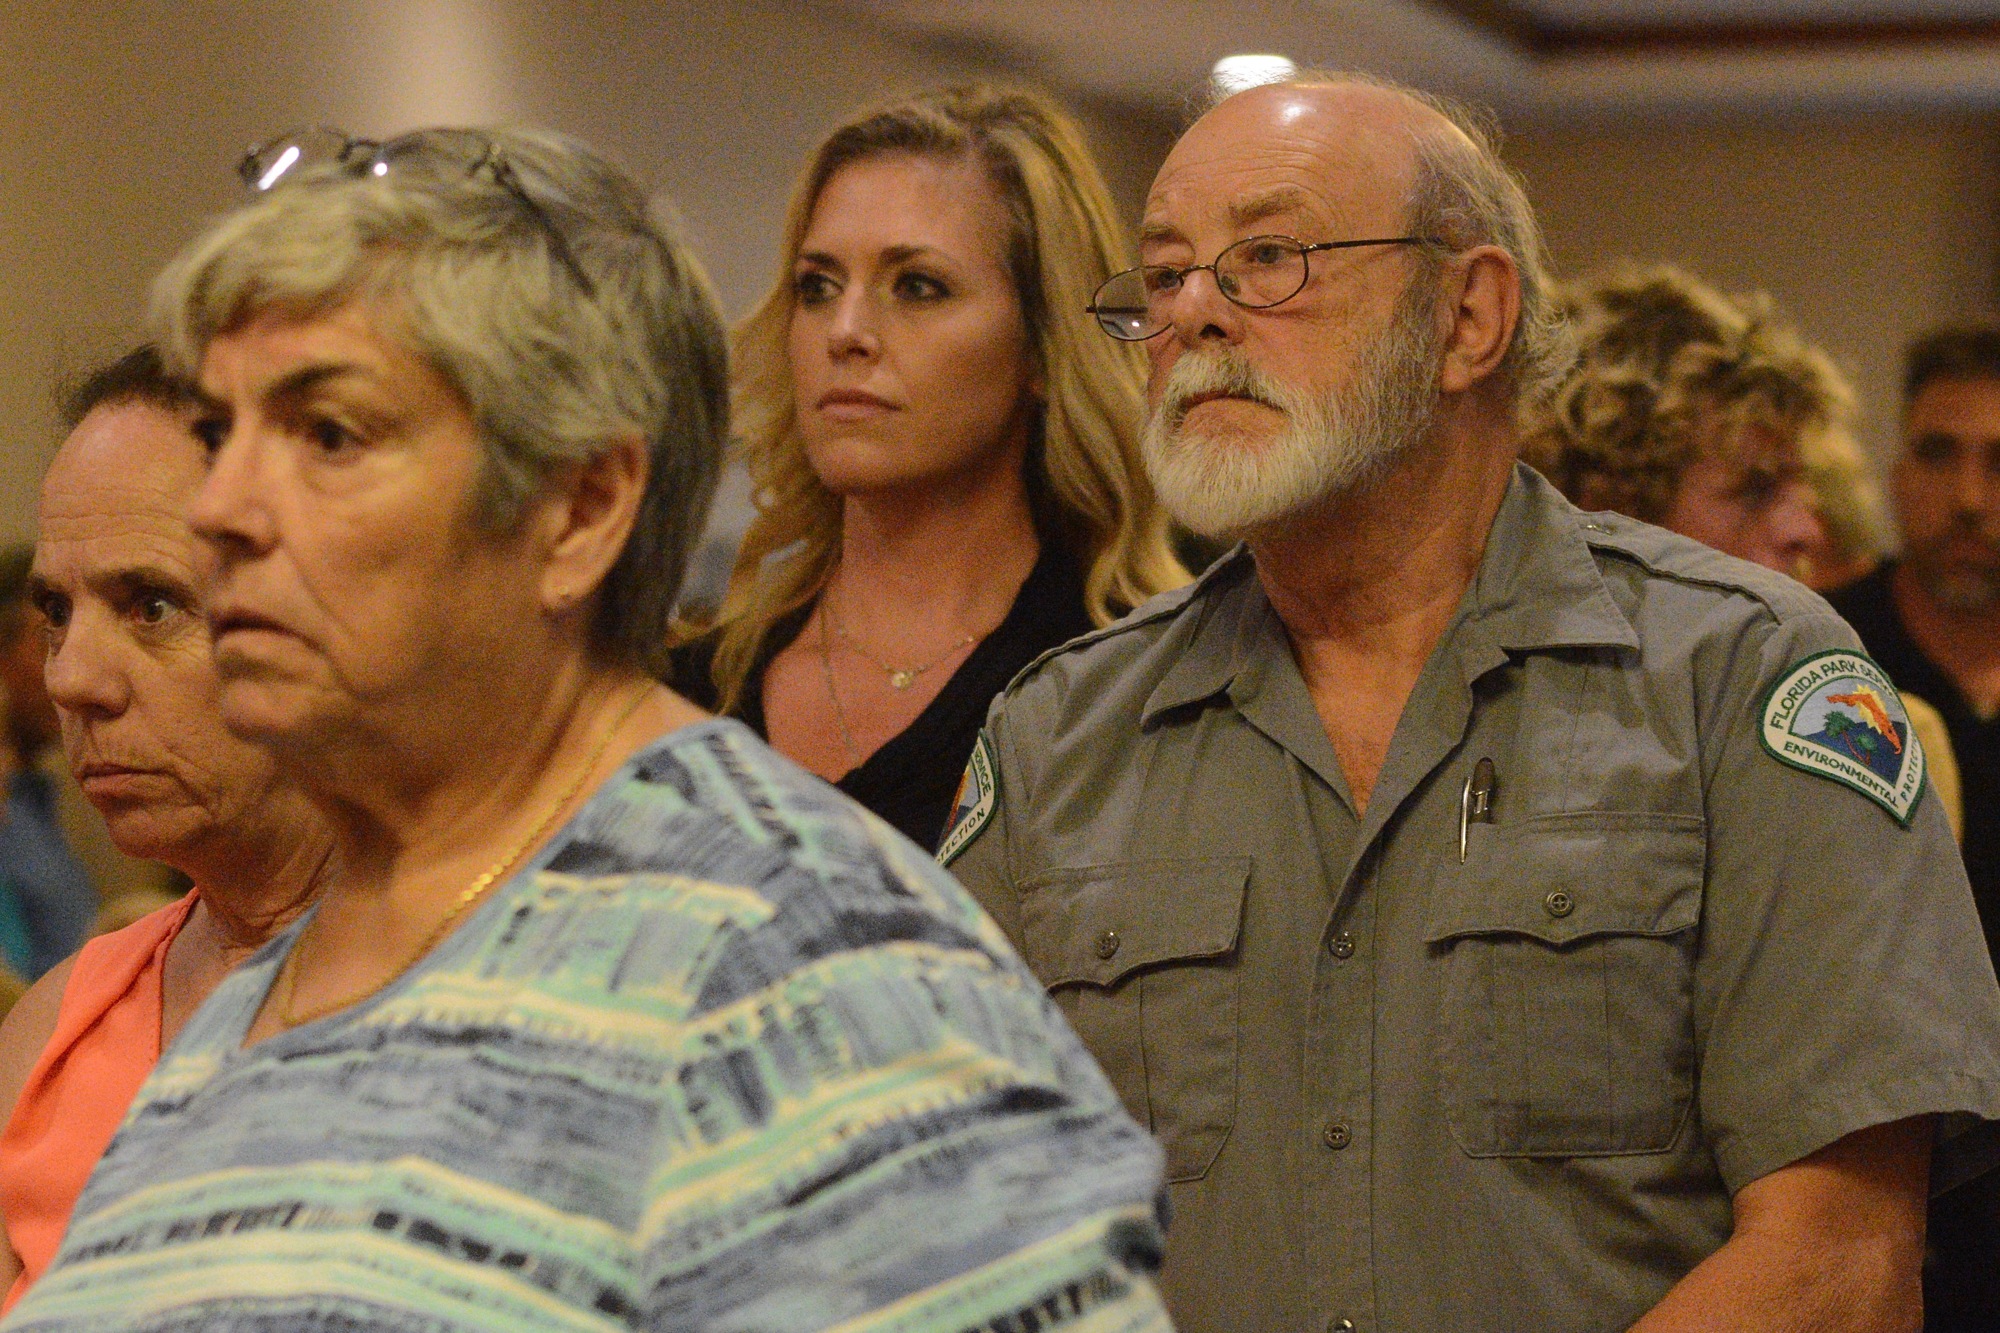 Residents stand in line to speak about the proposed development. (Photo by Jonathan Simmons.)